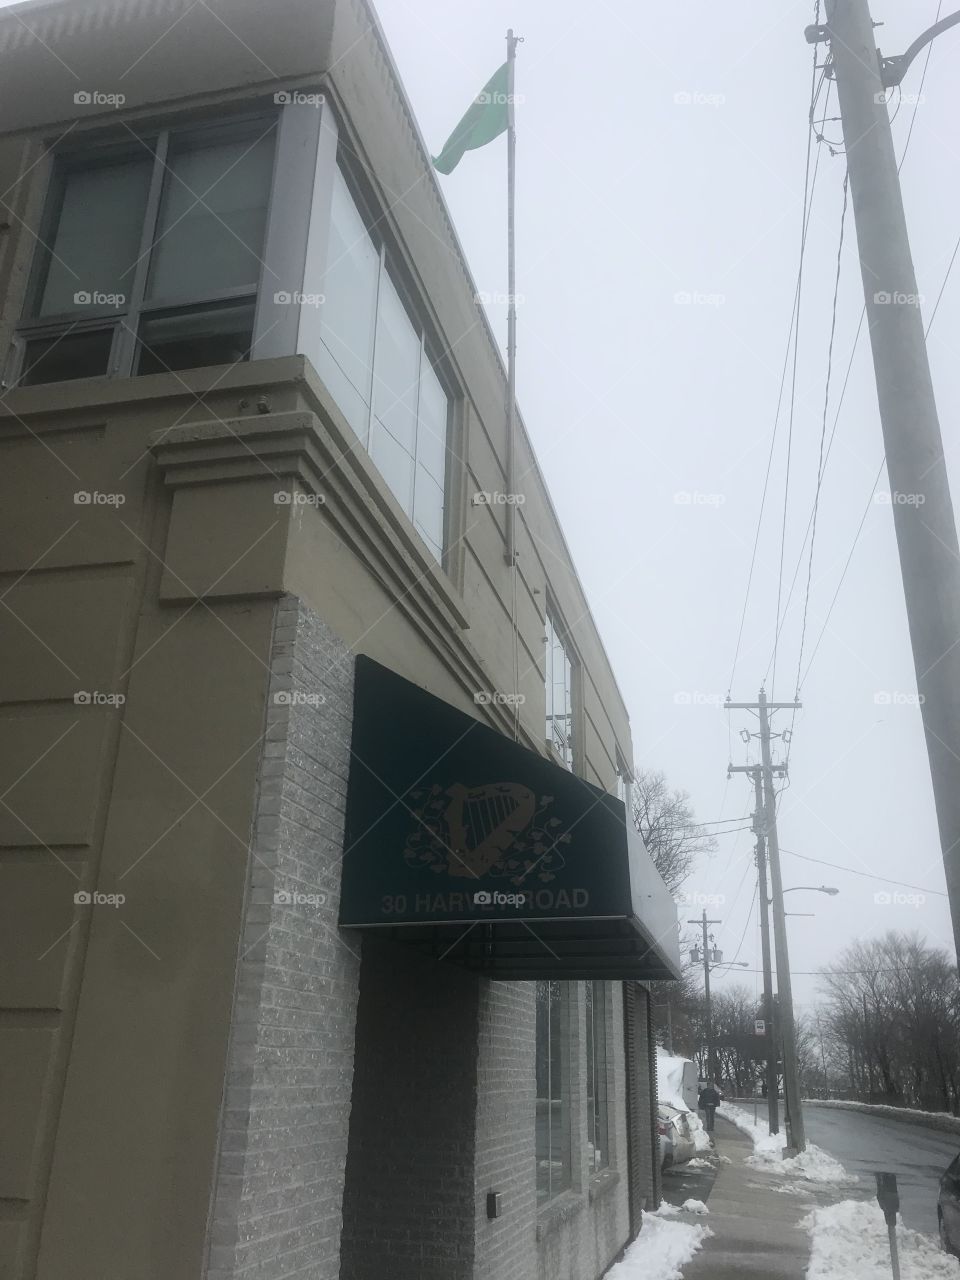 Canopy above the benevolent Irish society, founded in the 1800’s in downtown St. John’s, NL (newfoundland), Atlantic Canada. It’s a charity and non profit that does charity work peace work and other such things. Great group to book venues for events!